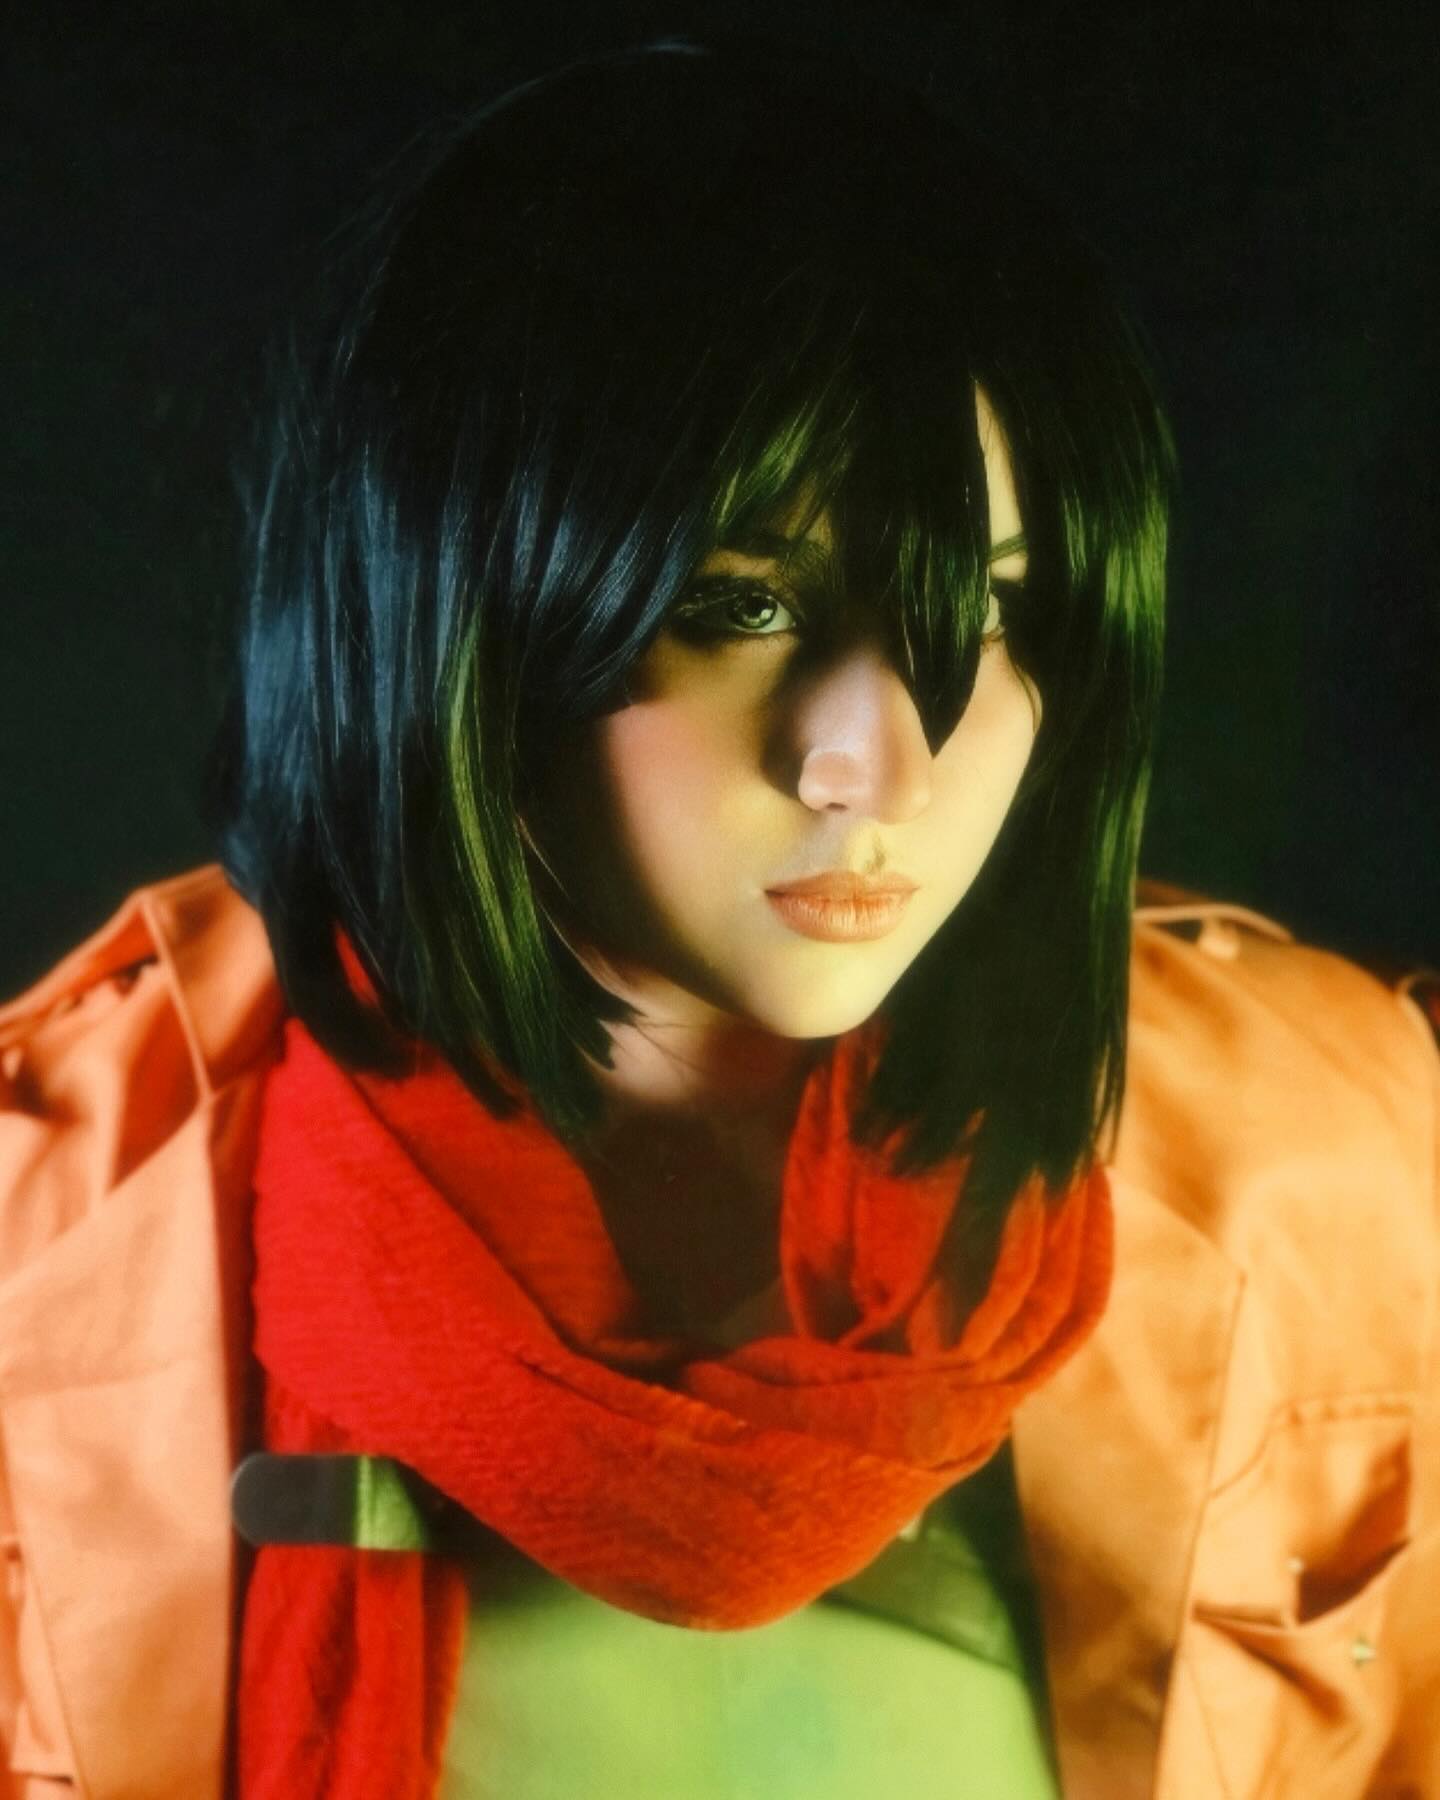 I said “Eren” in Mikasa’s voice entirely too much taking these photos lmao
…
Character: Mikasa (Attack on Titan)
….
#cosplay #cosplayer #cosplaygirl #attackontitan #aot #mikasa #mikasacosplay